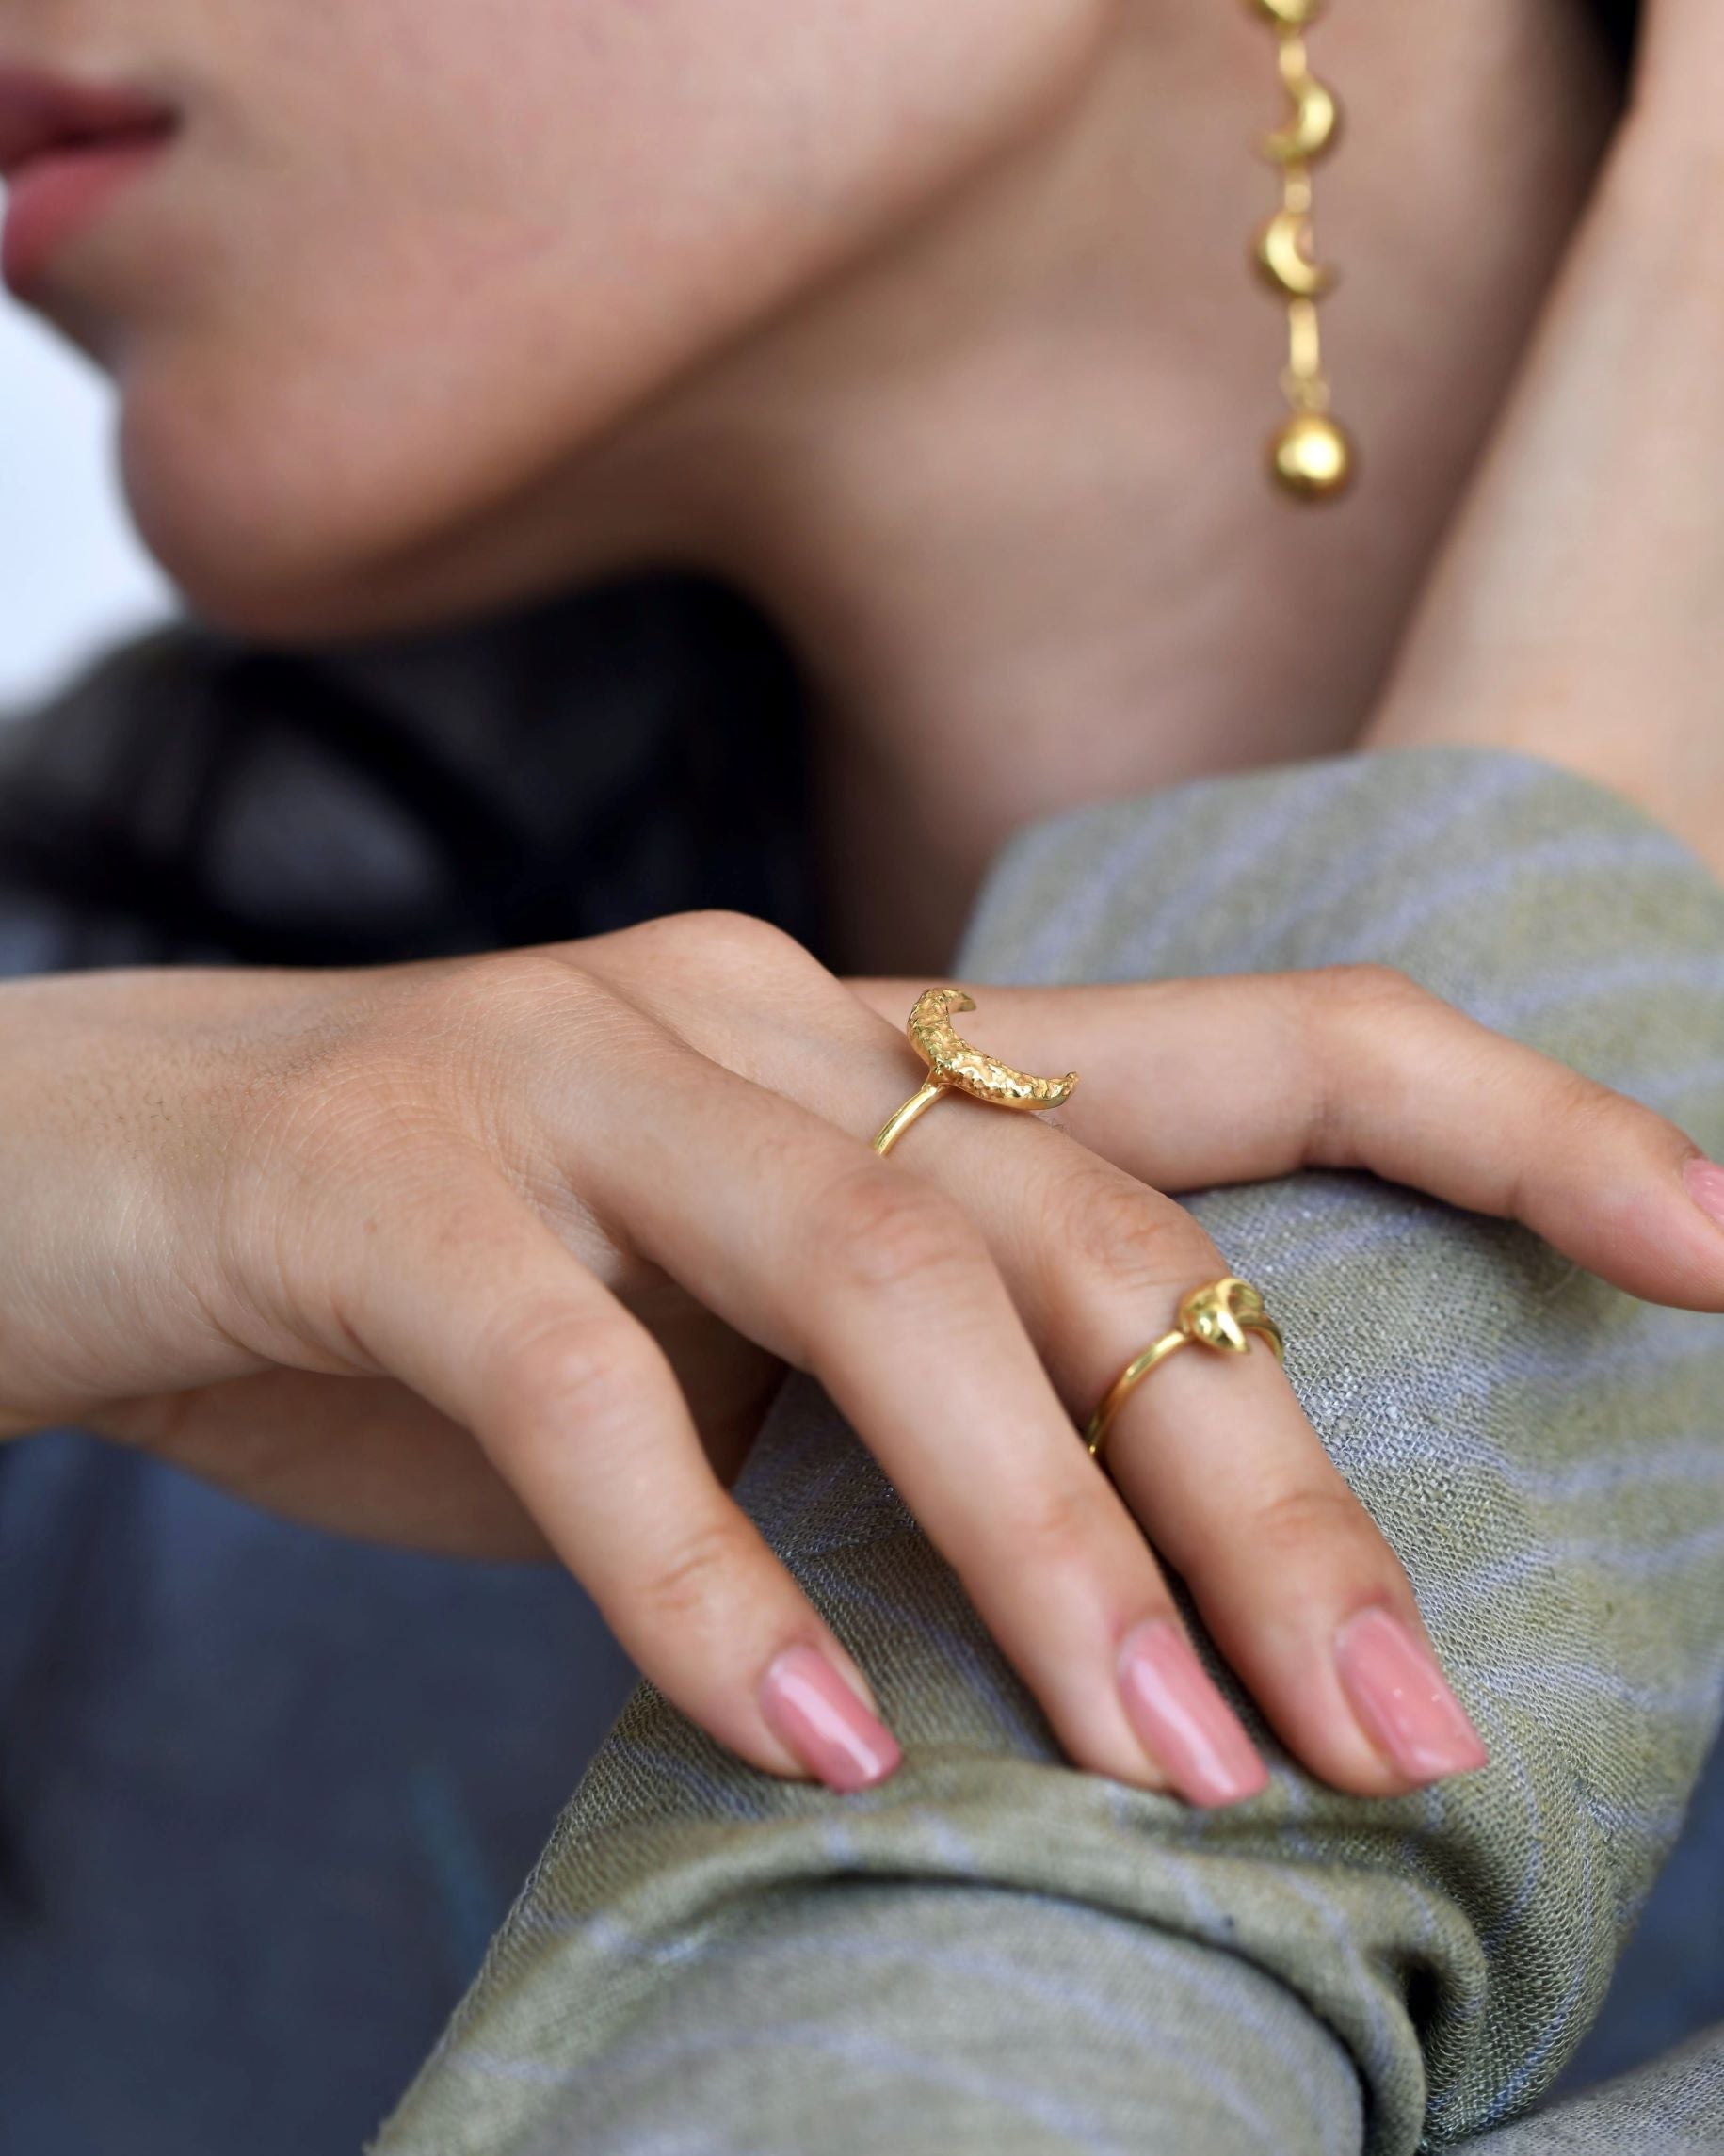 Gold Brass Crescent Moon Ring at Kamakhyaa by The Loom Art. This item is Brass, Cosmic Dream TLA, Fashion Jewellery, Free Size, Gold, Gold Plated, jewelry, Less than $50, Natural, Products less than $25, Rings, Textured